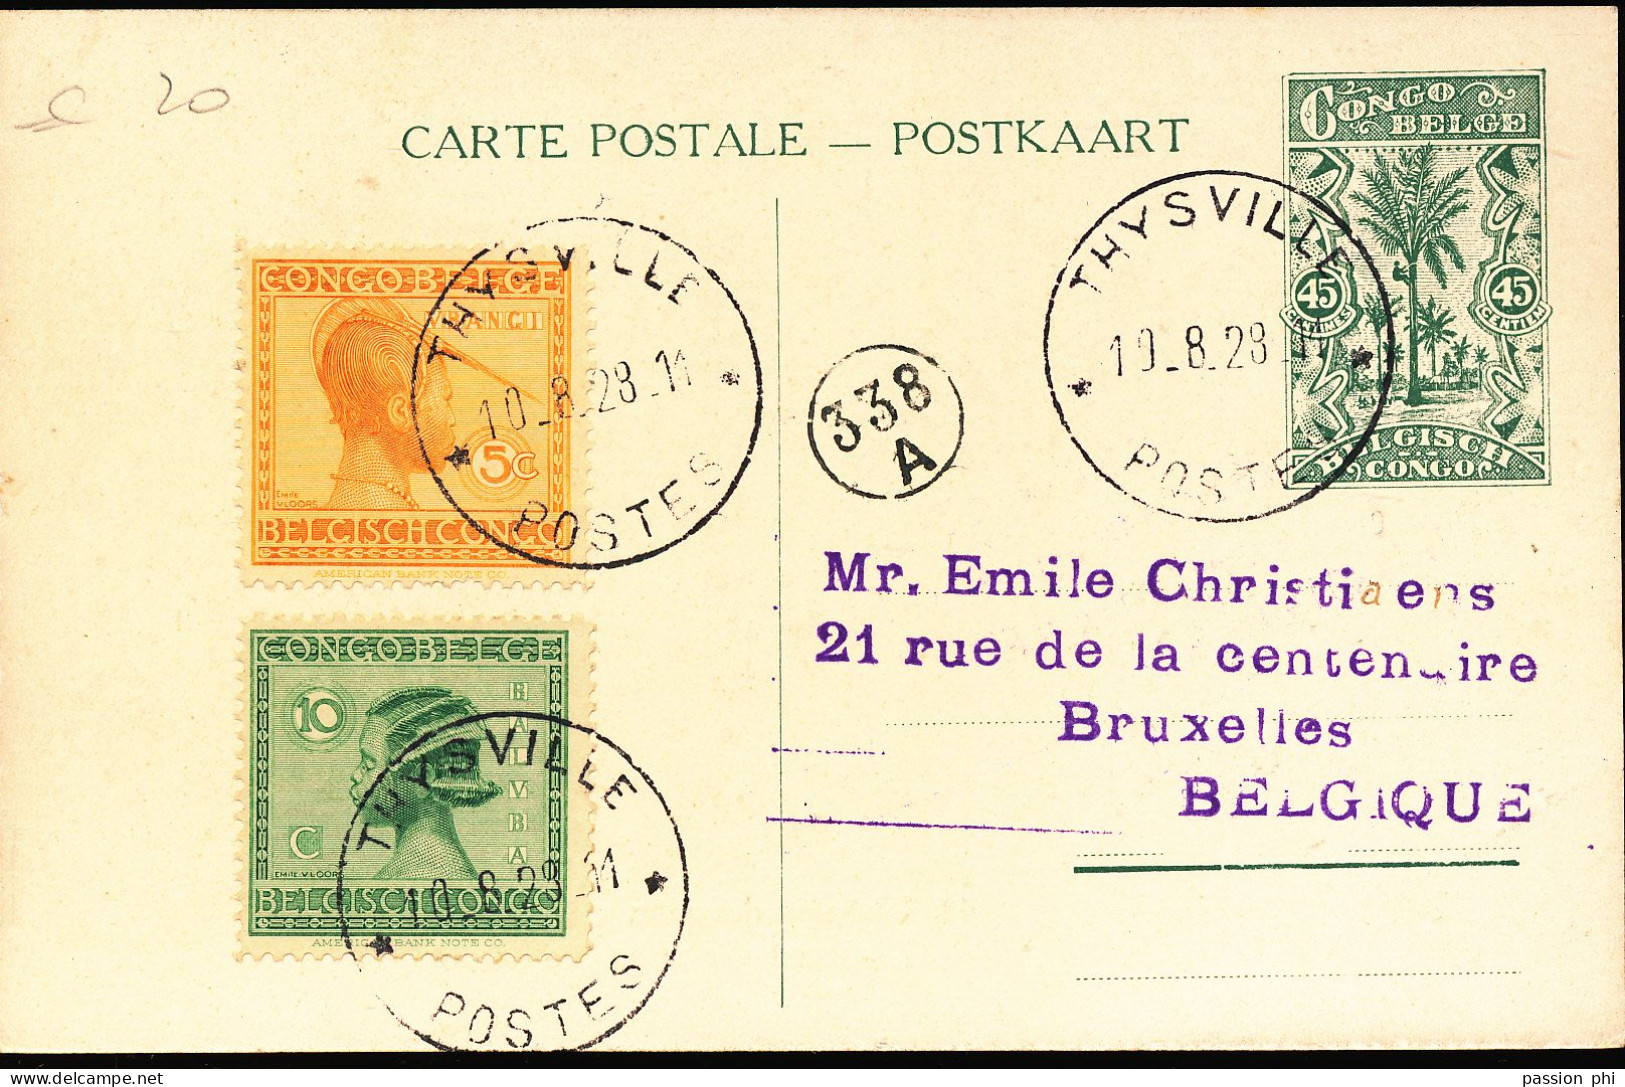 BELGIAN CONGO 1912 ISSUE PPS SBEP 66a VIEW 48 USED - Enteros Postales